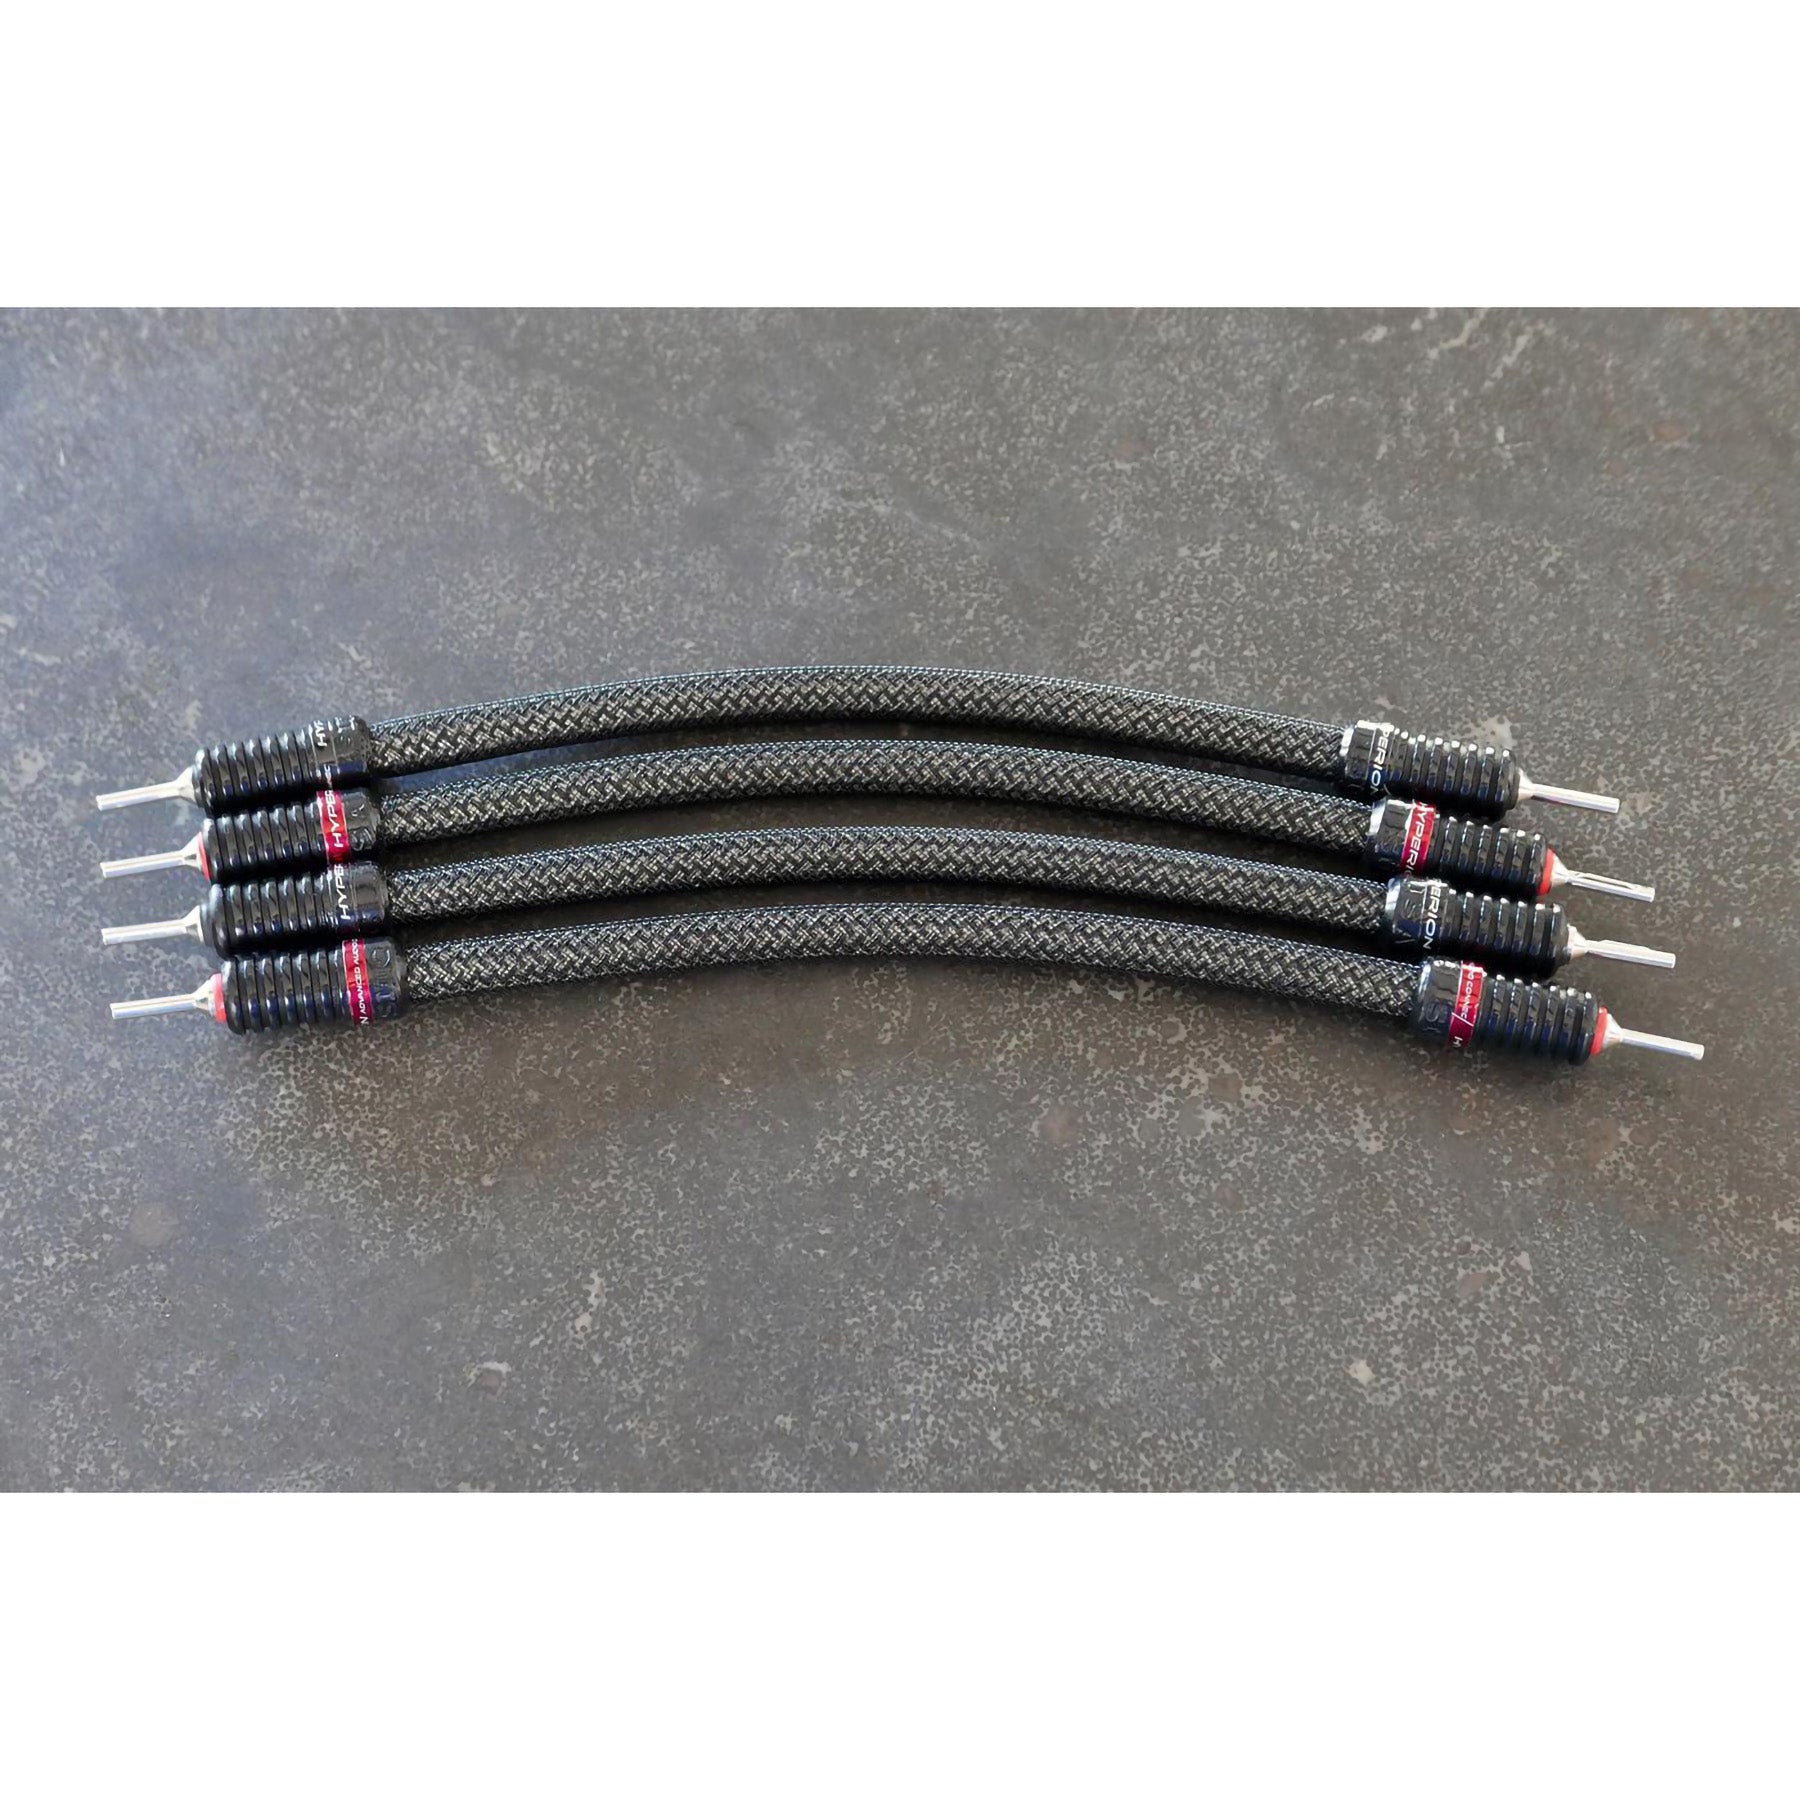 Stage III Concepts Cerberus Jumper Cable (set of 4)